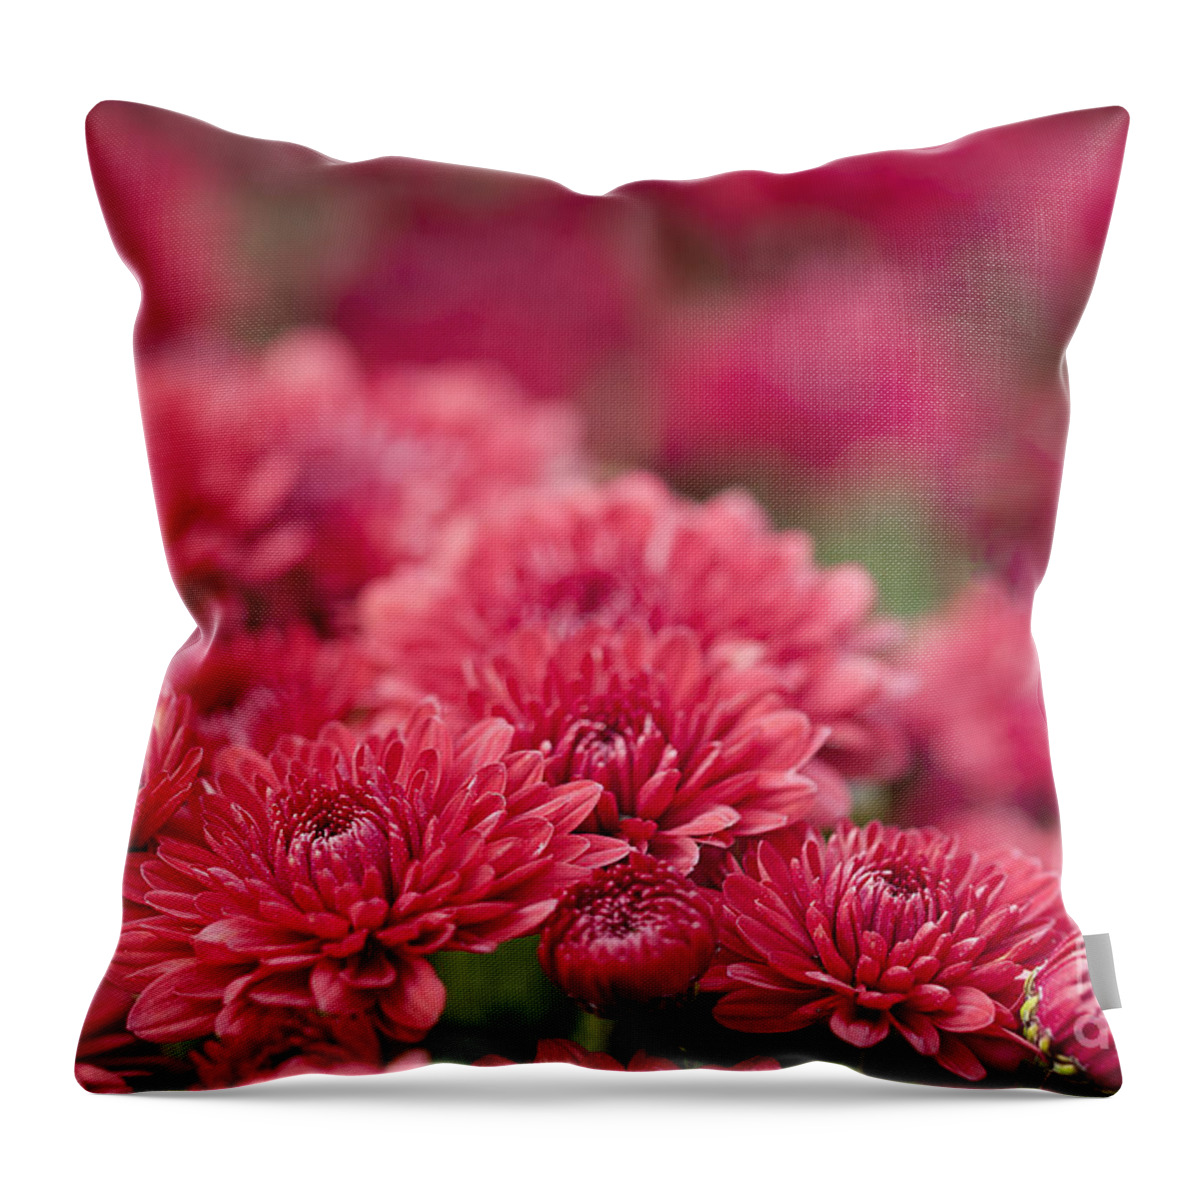 Mums Throw Pillow featuring the photograph Cheerful by Patty Colabuono